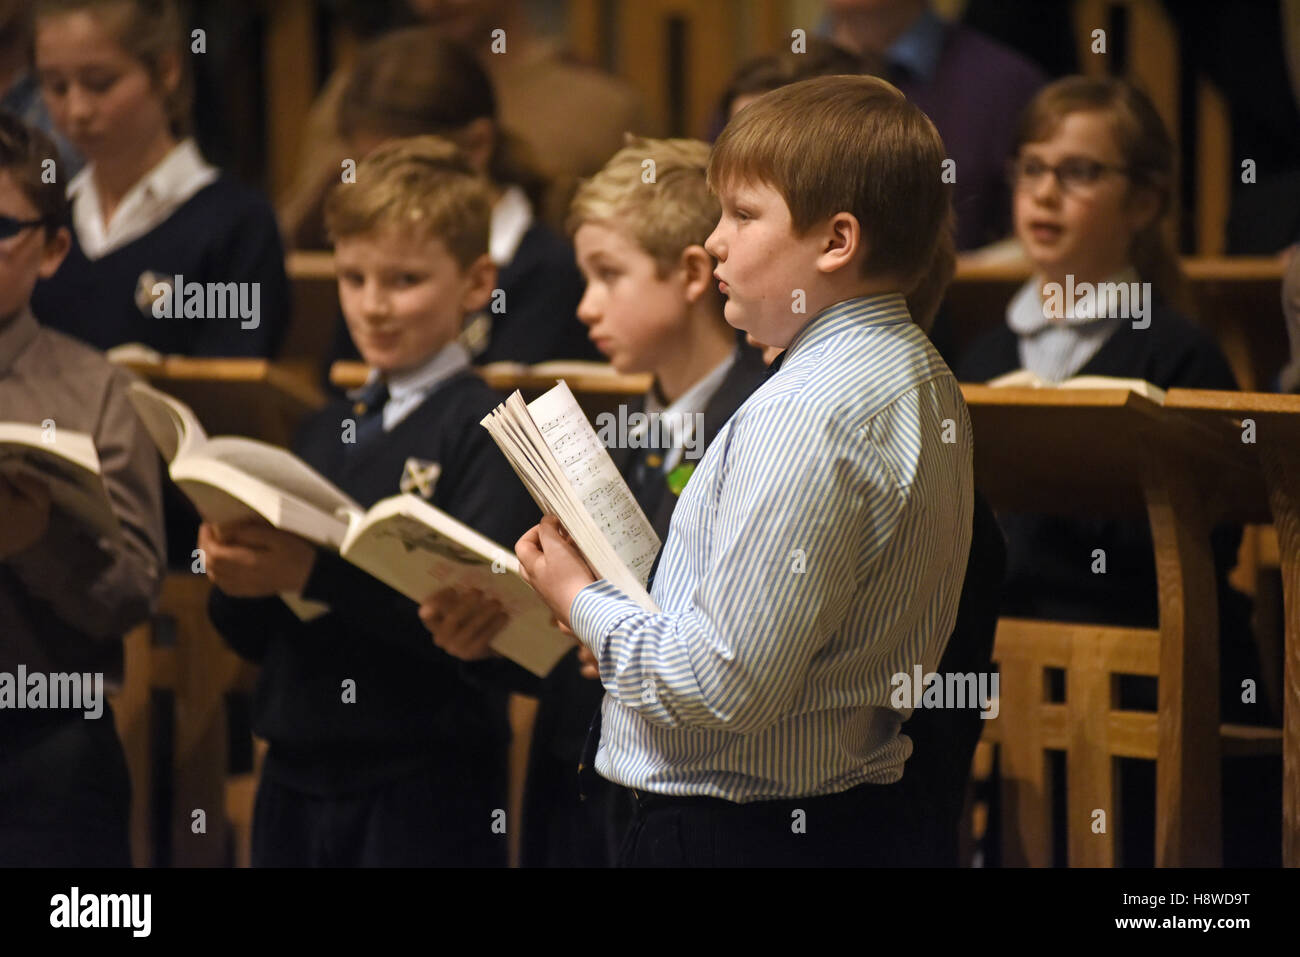 Choristers being conducted by choir master at a recording session for a commercial CD production. Inside wells Cathedral. Stock Photo